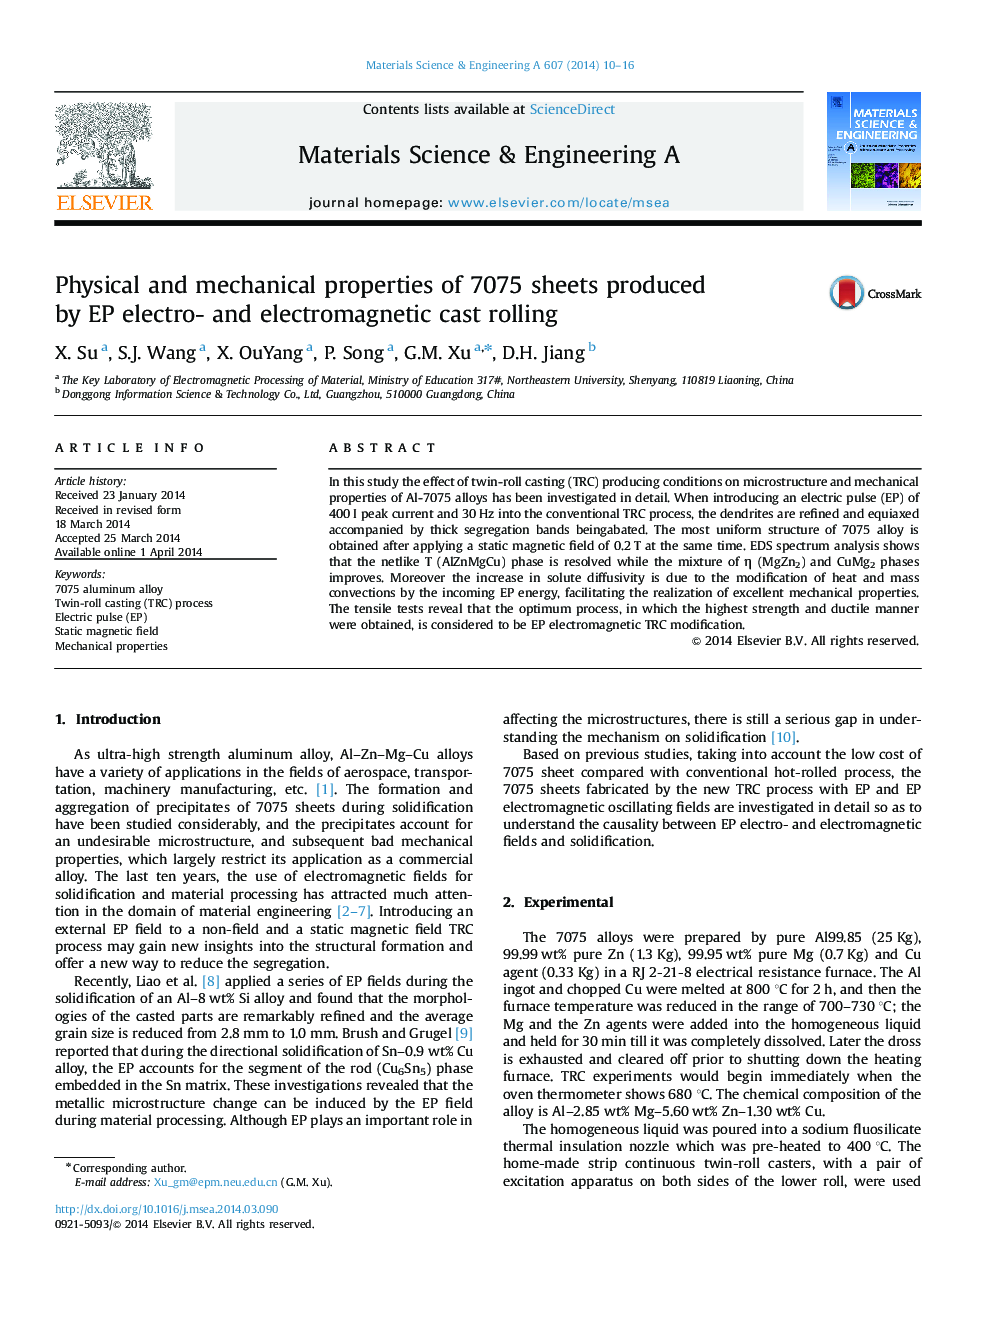 Physical and mechanical properties of 7075 sheets produced by EP electro- and electromagnetic cast rolling